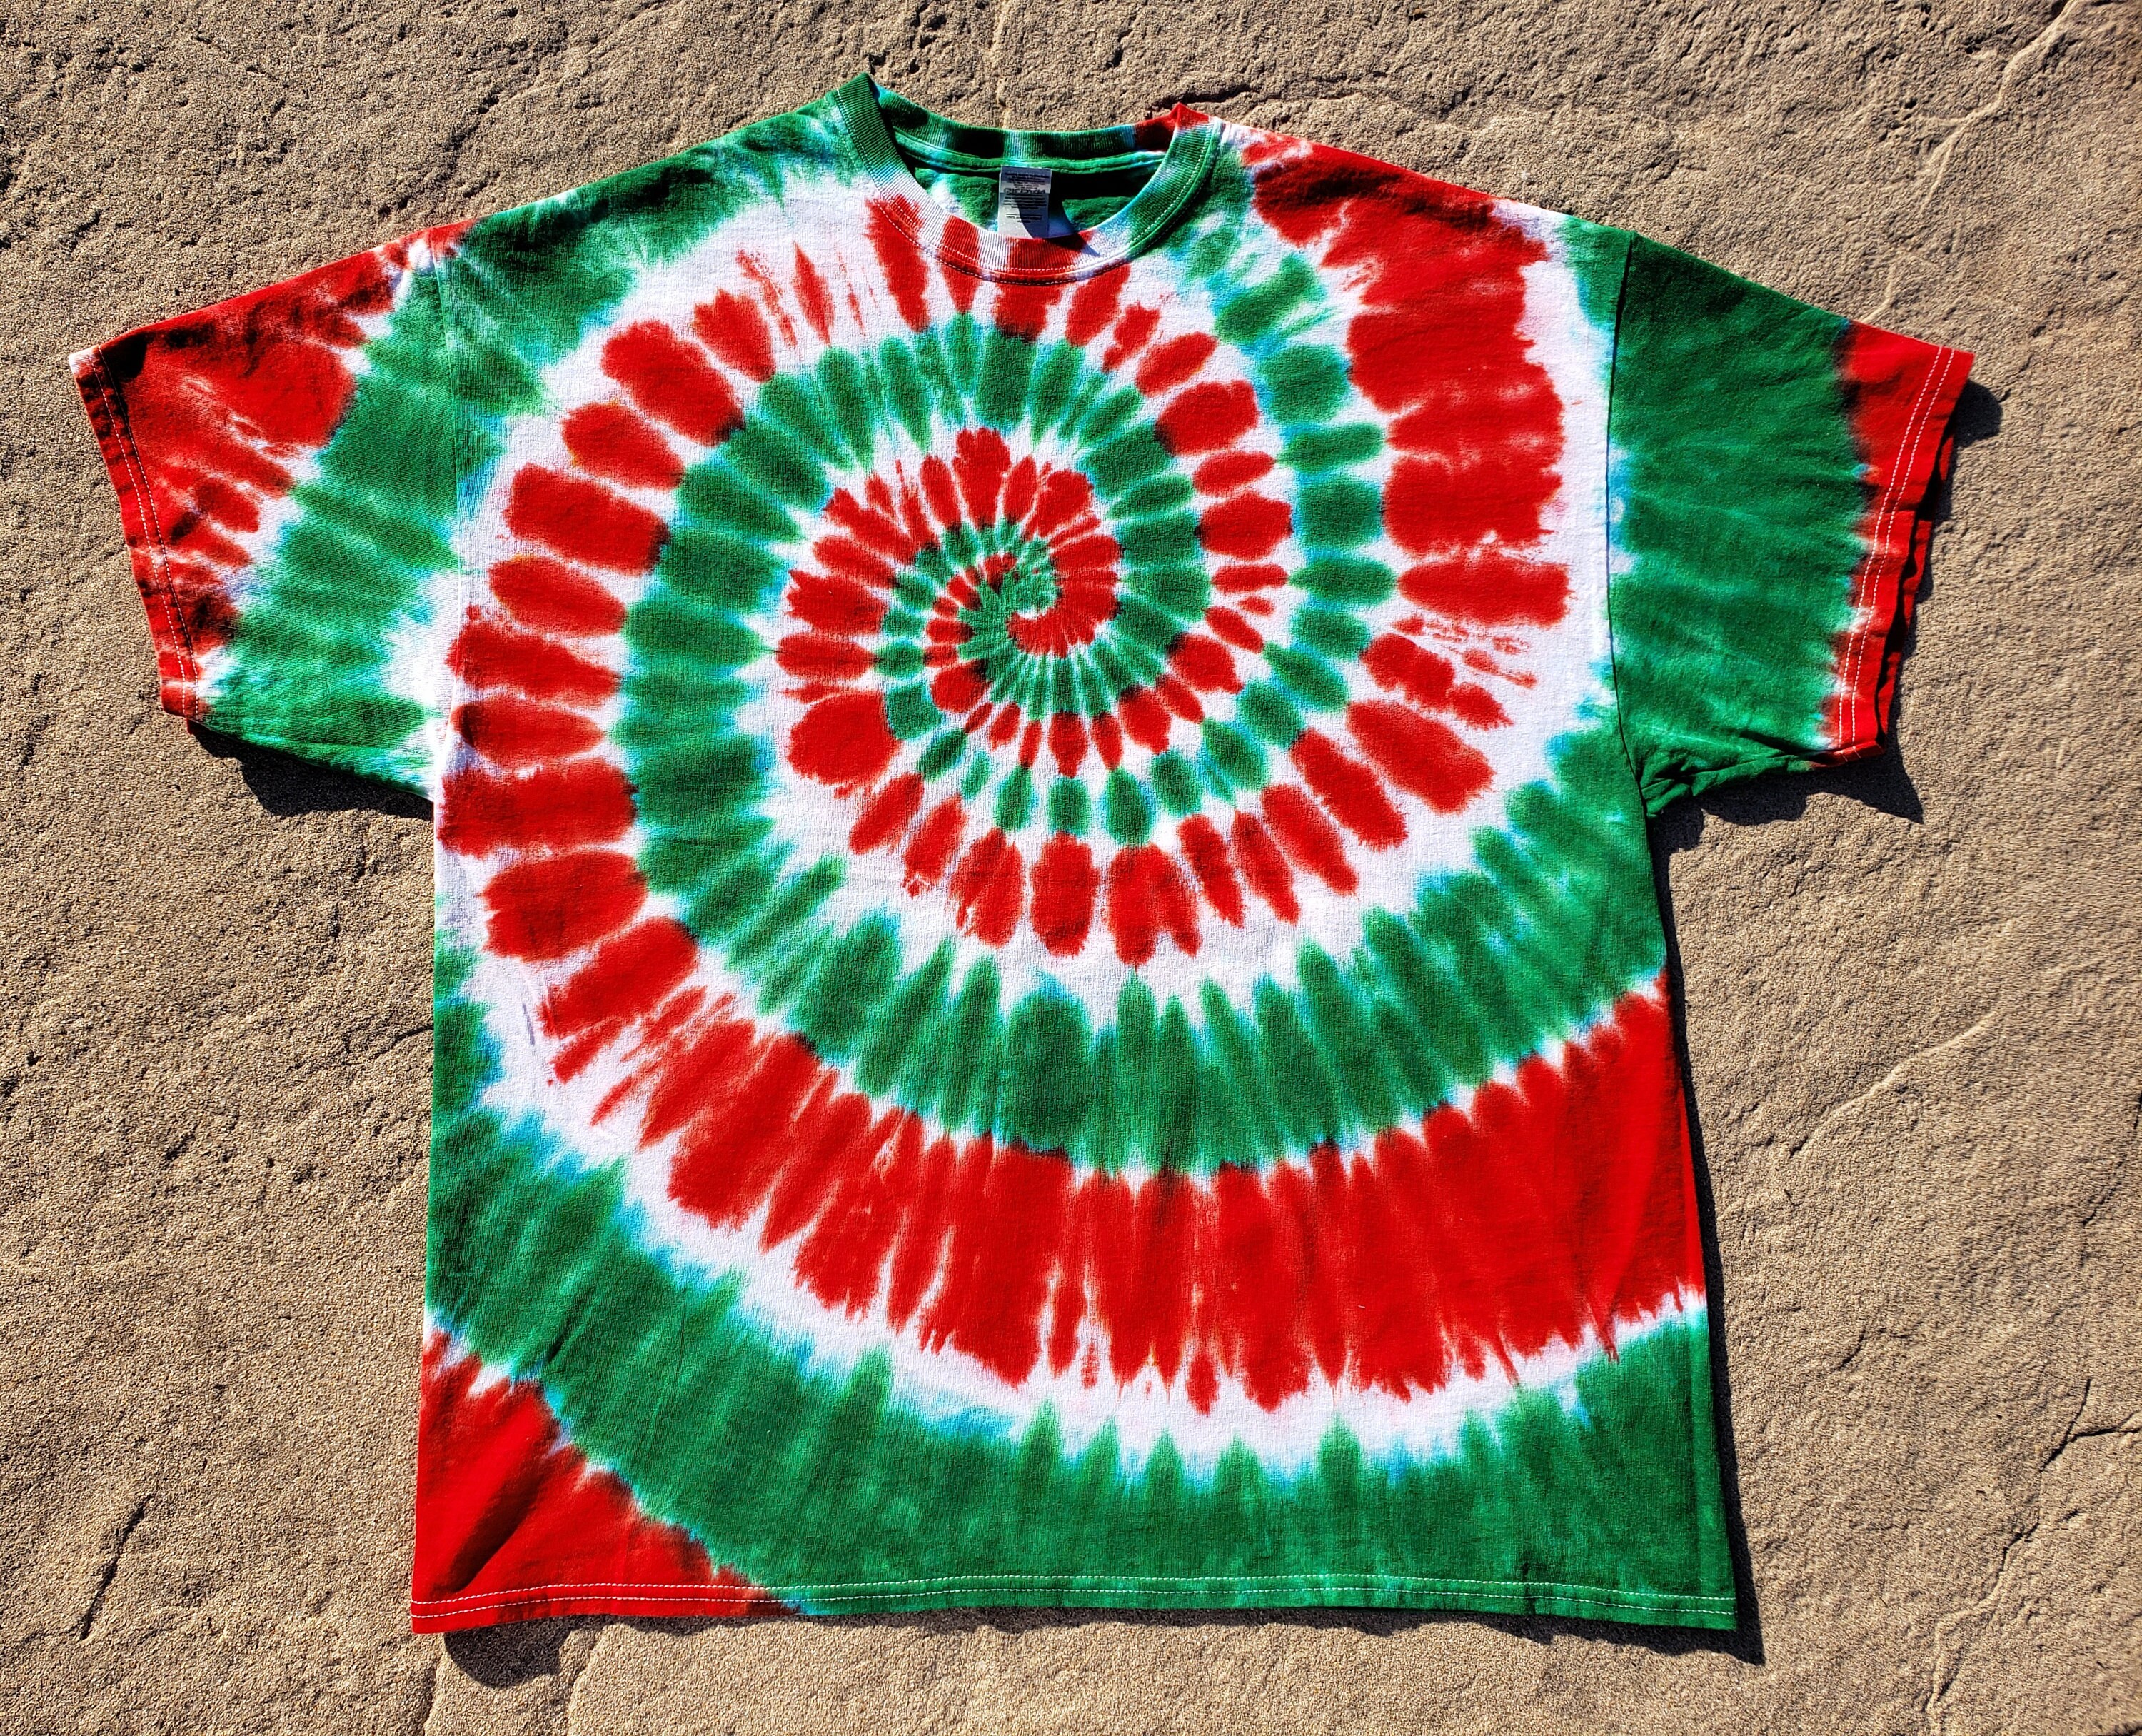 TheAtomicCats Merry Christmas Red, Green and White Spiral Tie Dye T-Shirt Adult Sizes Gift Idea for Her Holiday Season, Gift Idea for Him Stocking Stuffer